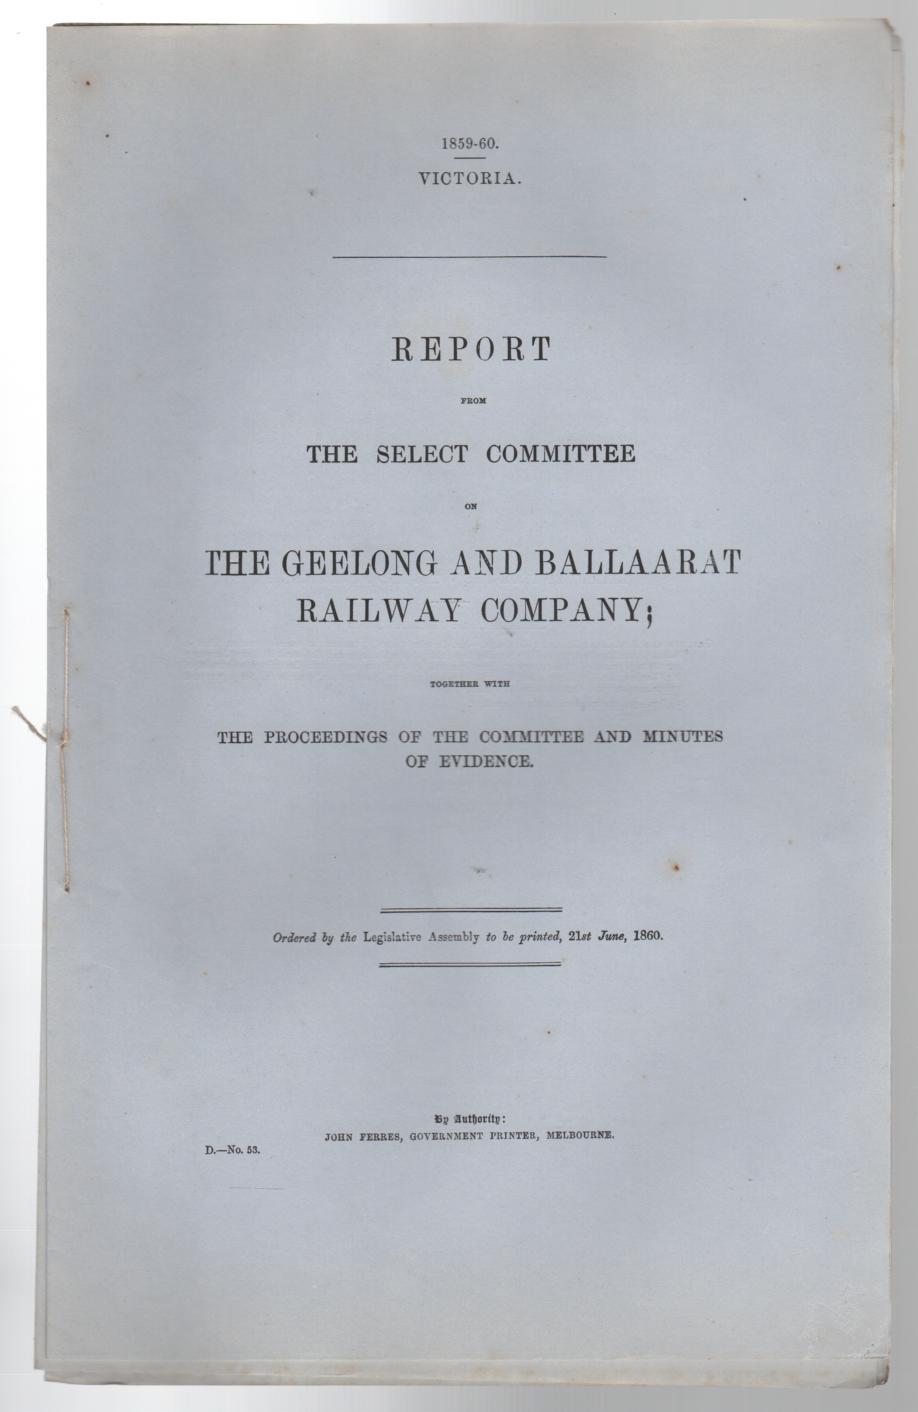 VICTORIAN RAILWAYS. - Report from The Select Committee on The Geelong and Ballaarat Railway Company; Together with The Proceedings of the Committee and Minutes of Evidence. Victoria 1859-60.